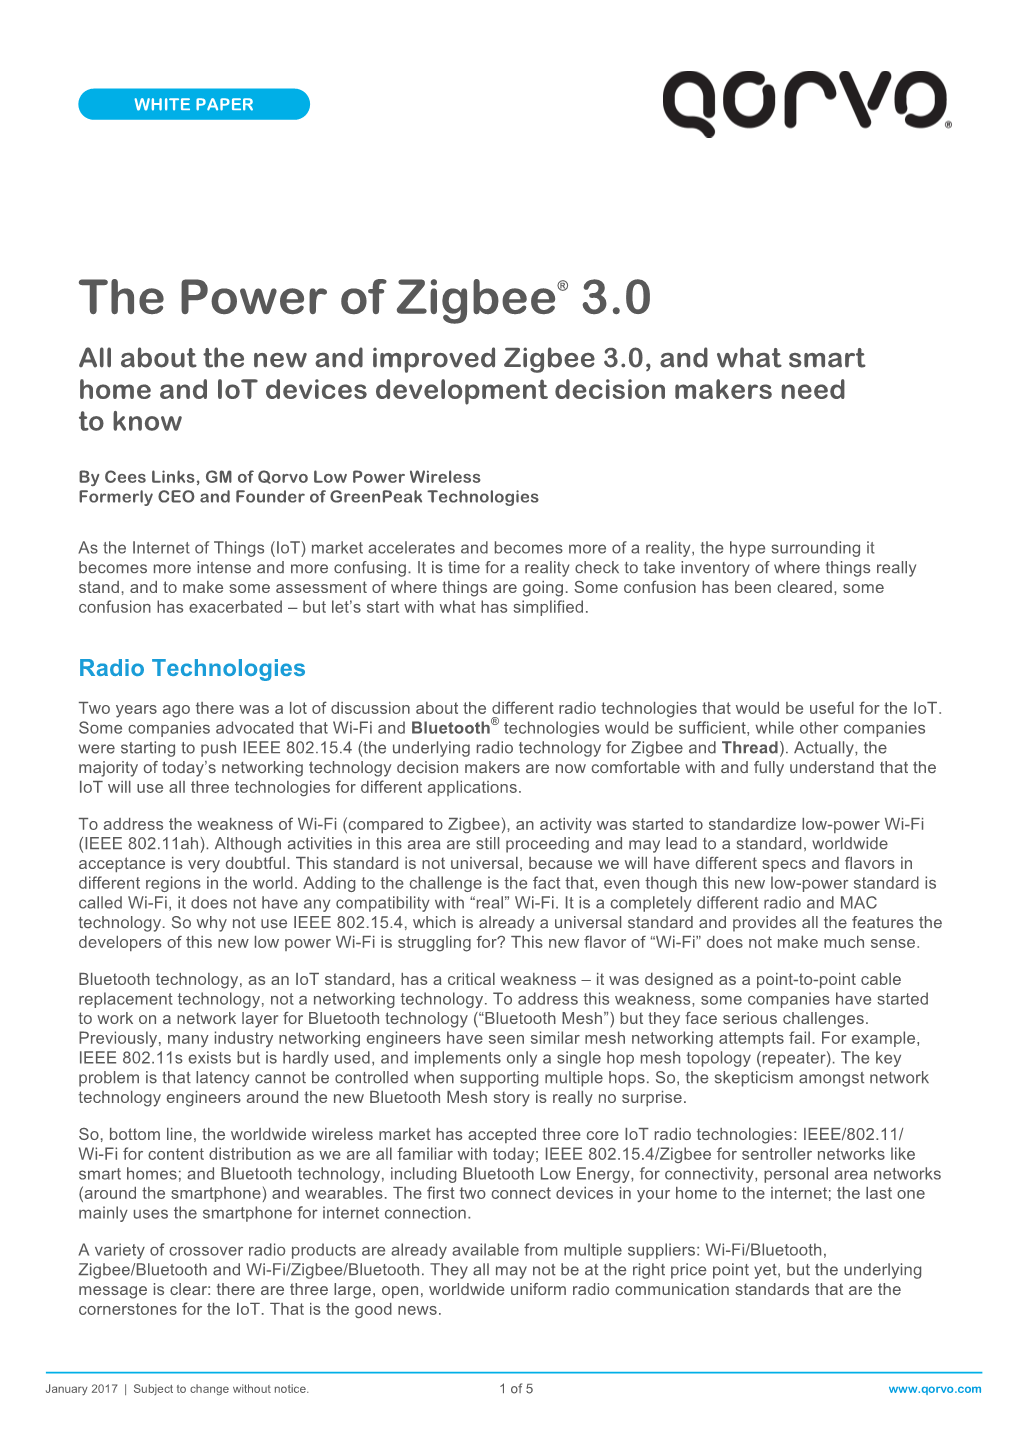 The Power of Zigbee® 3.0 All About the New and Improved Zigbee 3.0, and What Smart Home and Iot Devices Development Decision Makers Need to Know